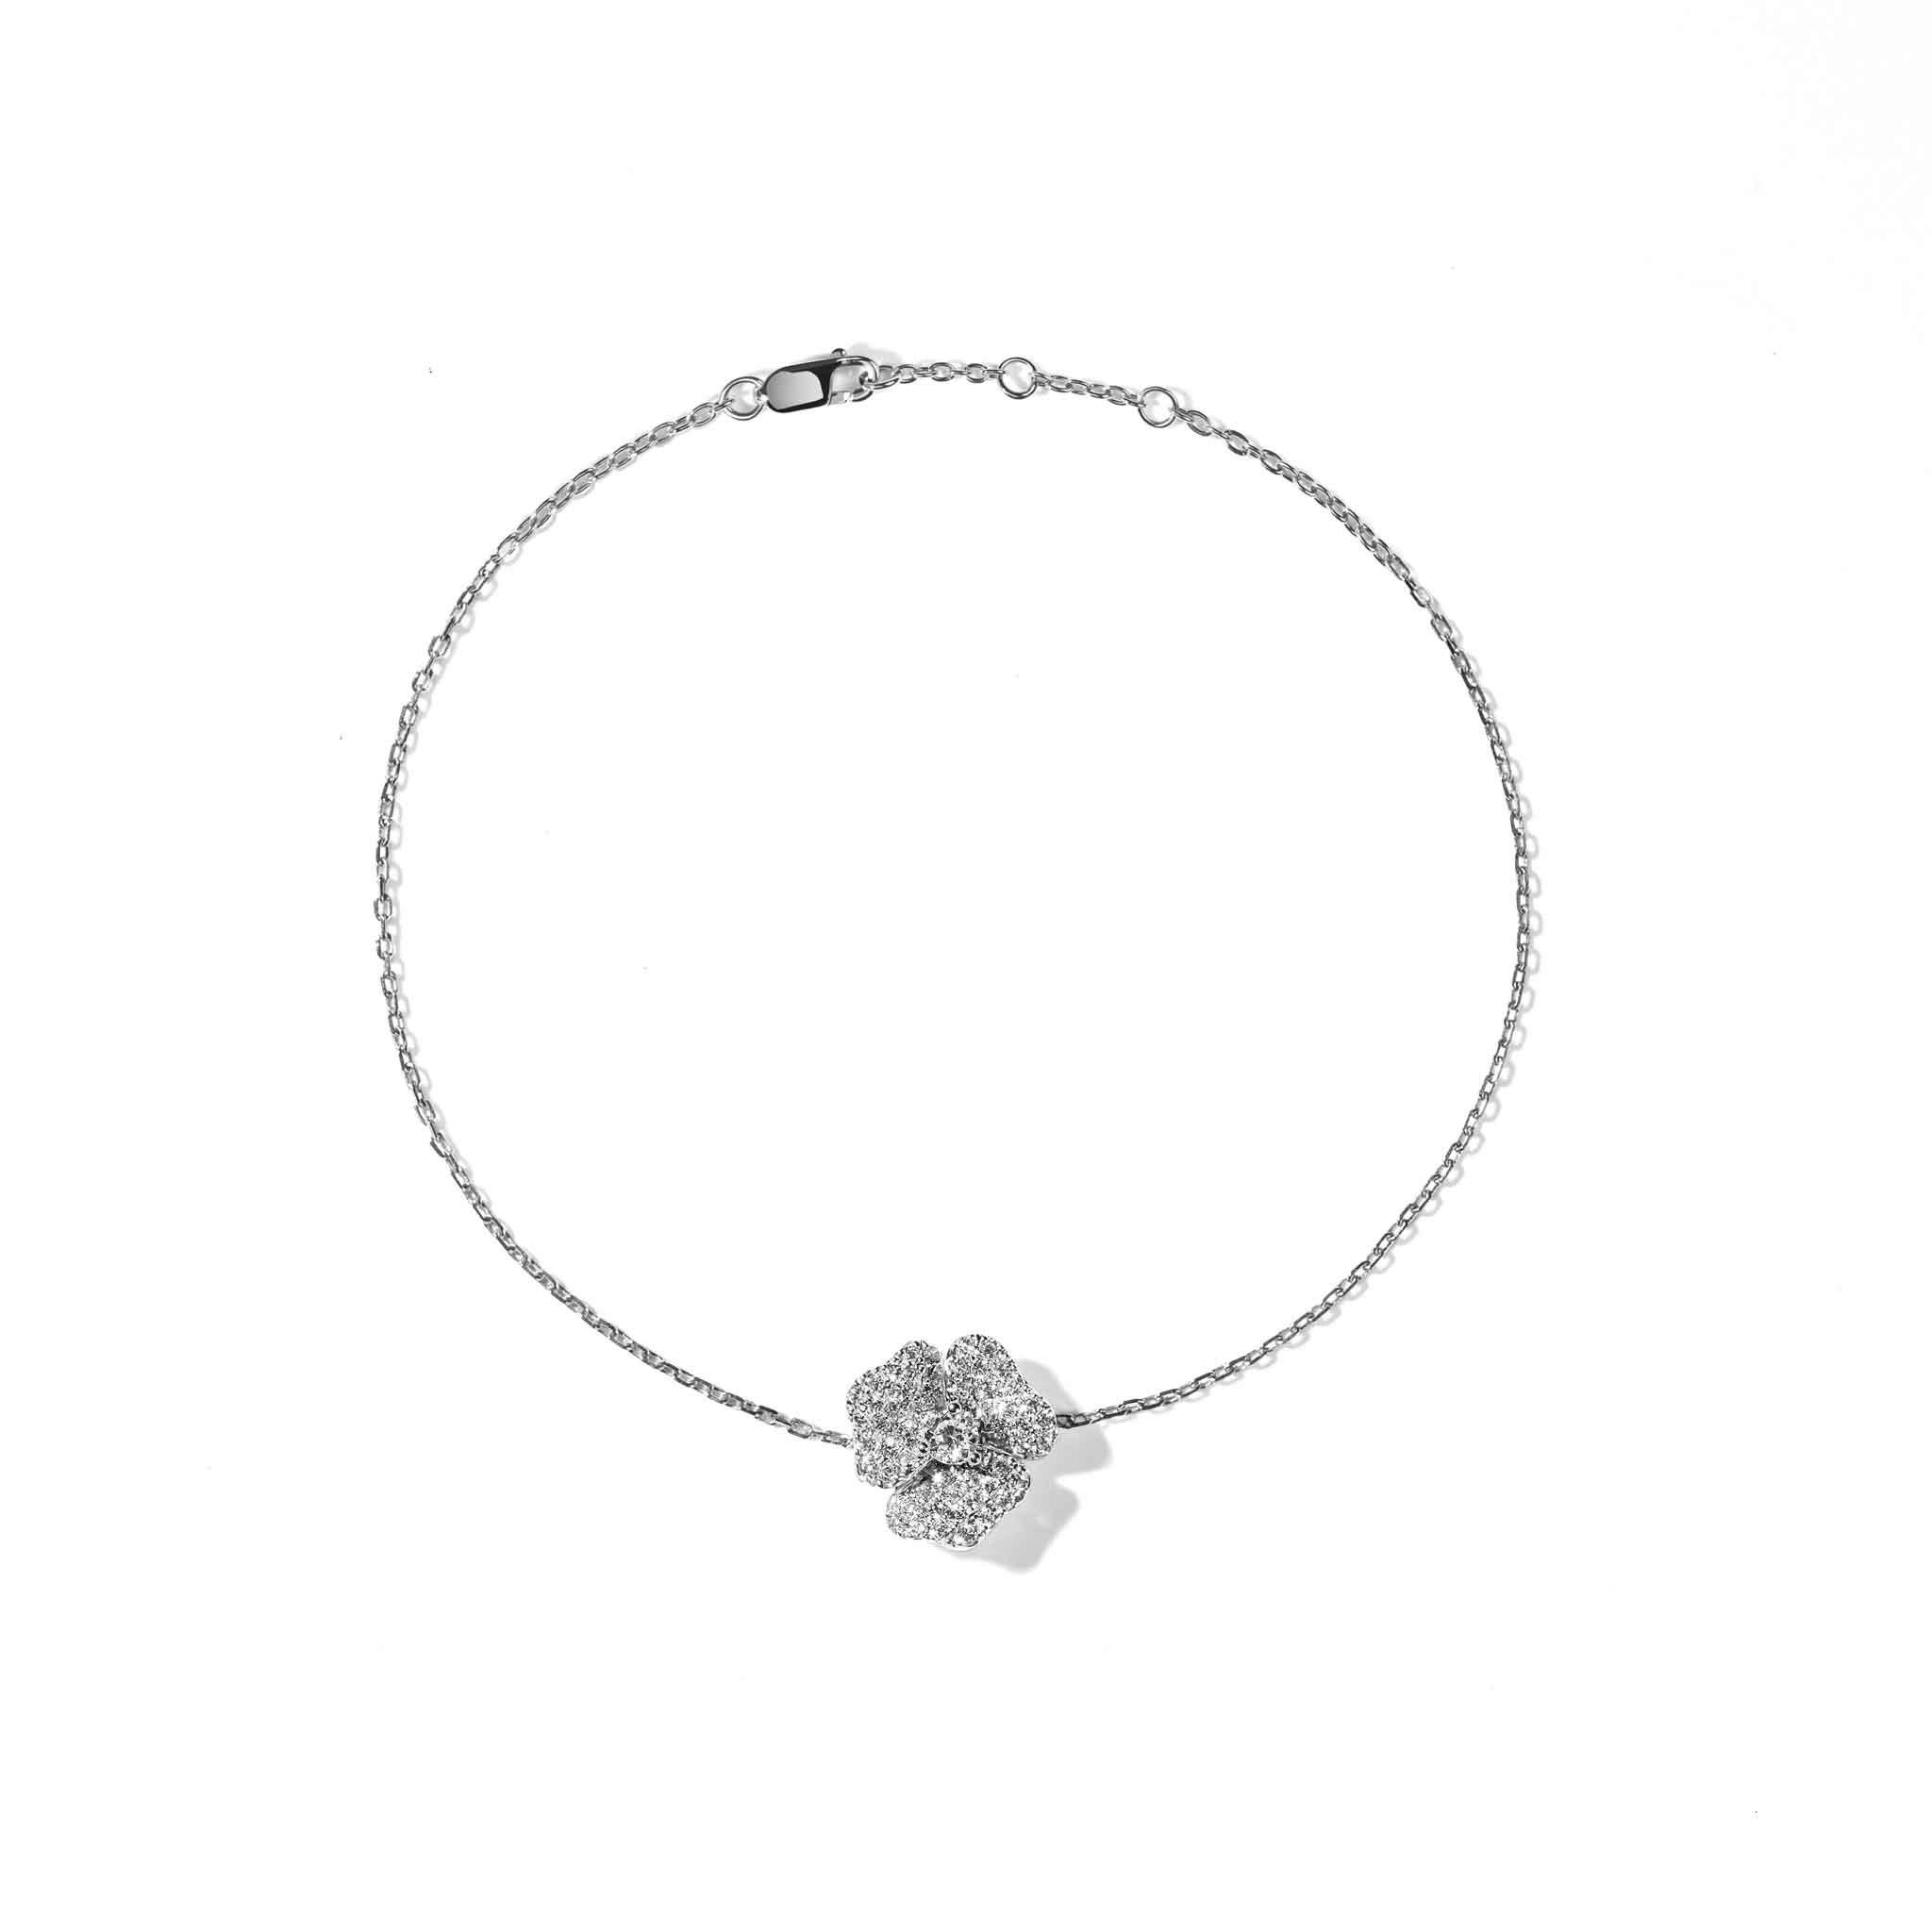 Crafted in 18K white gold, this elegant bracelet is encrusted with White Diamonds and has a White Sapphire Stone at its center. 

Part of our bloom collection, this pansy flower-inspired piece was designed to remind you of the infinite possibilities